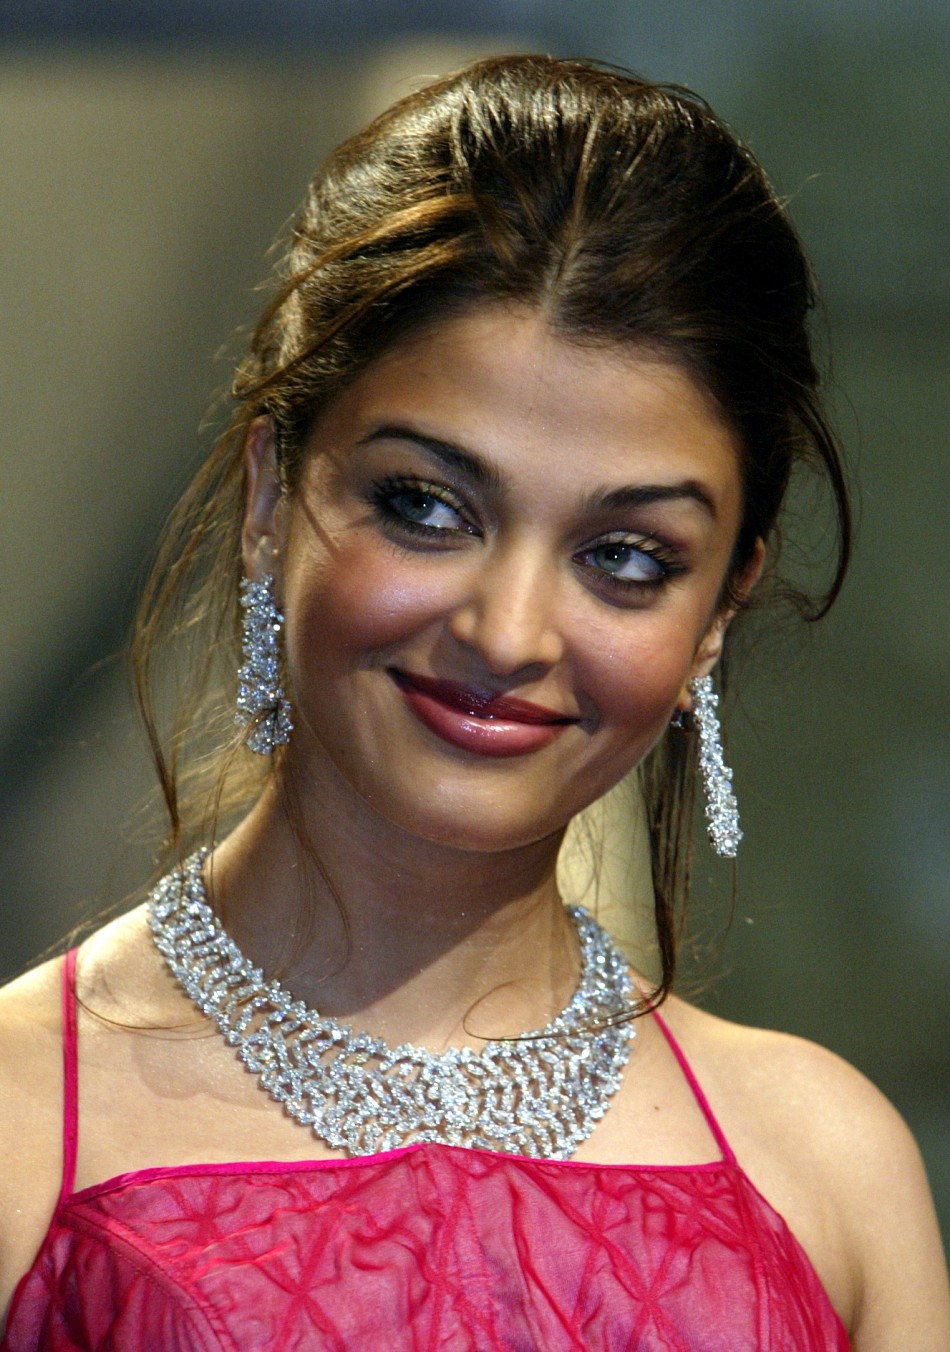 Jury member Aishwarya Rai, Indian actress and a former Miss World, smiles during opening ceremonies at the 56th International Film Festival in Cannes, May 14, 2003.